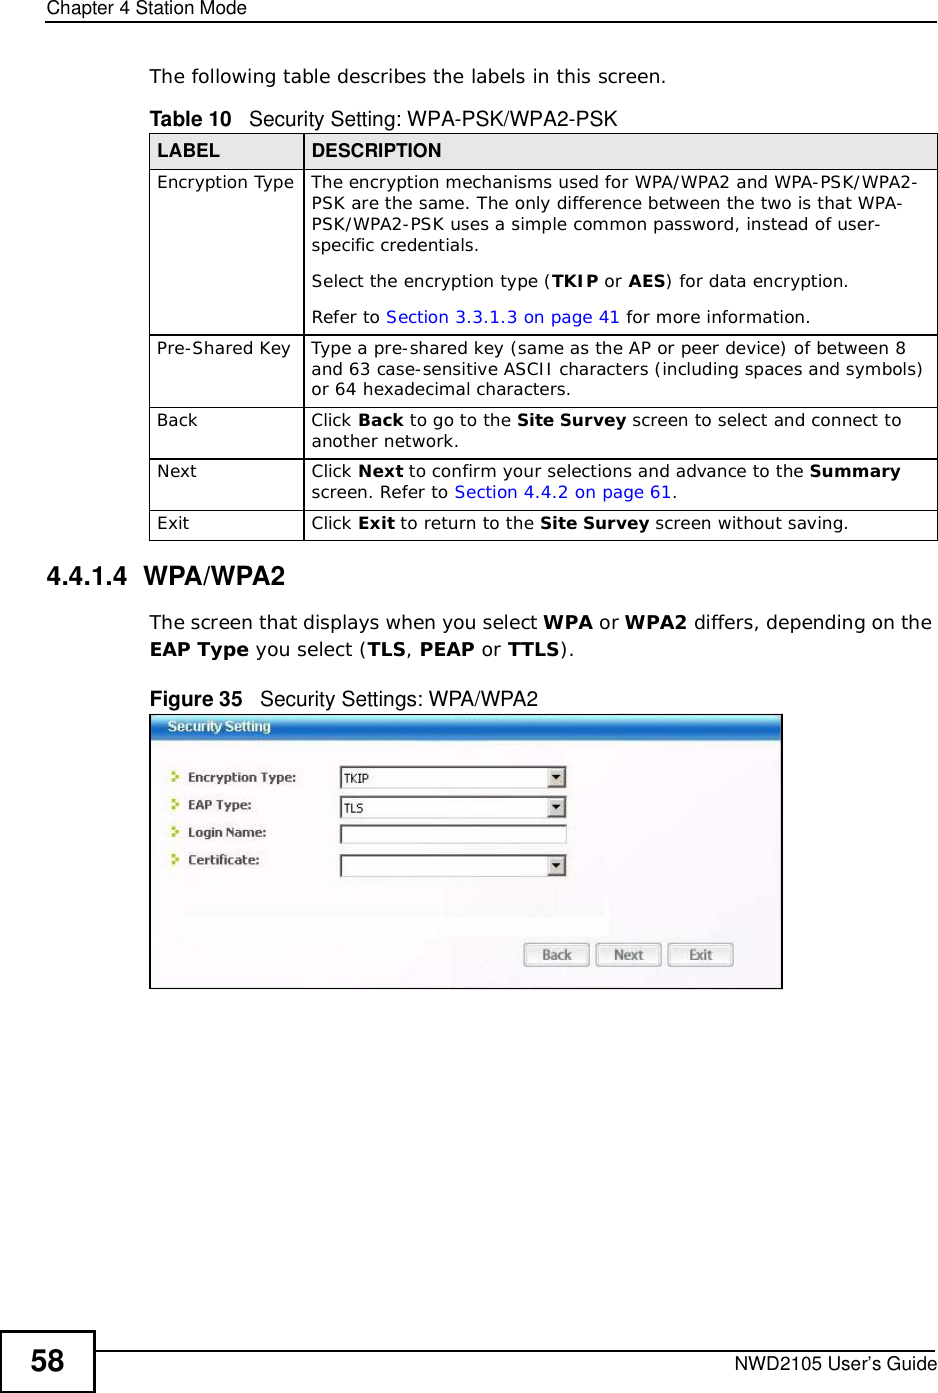 Chapter 4Station ModeNWD2105 User’s Guide58The following table describes the labels in this screen. 4.4.1.4  WPA/WPA2The screen that displays when you select WPA or WPA2 differs, depending on the EAP Type you select (TLS,PEAP or TTLS).Figure 35   Security Settings: WPA/WPA2 Table 10   Security Setting: WPA-PSK/WPA2-PSKLABEL DESCRIPTIONEncryption TypeThe encryption mechanisms used for WPA/WPA2 and WPA-PSK/WPA2-PSK are the same. The only difference between the two is that WPA-PSK/WPA2-PSK uses a simple common password, instead of user-specific credentials.Select the encryption type (TKIP or AES) for data encryption.Refer to Section 3.3.1.3 on page 41 for more information.Pre-Shared KeyType a pre-shared key (same as the AP or peer device) of between 8 and 63 case-sensitive ASCII characters (including spaces and symbols) or 64 hexadecimal characters.BackClick Back to go to the Site Survey screen to select and connect to another network.NextClick Next to confirm your selections and advance to the Summary screen. Refer to Section 4.4.2 on page 61.ExitClick Exit to return to the Site Survey screen without saving.